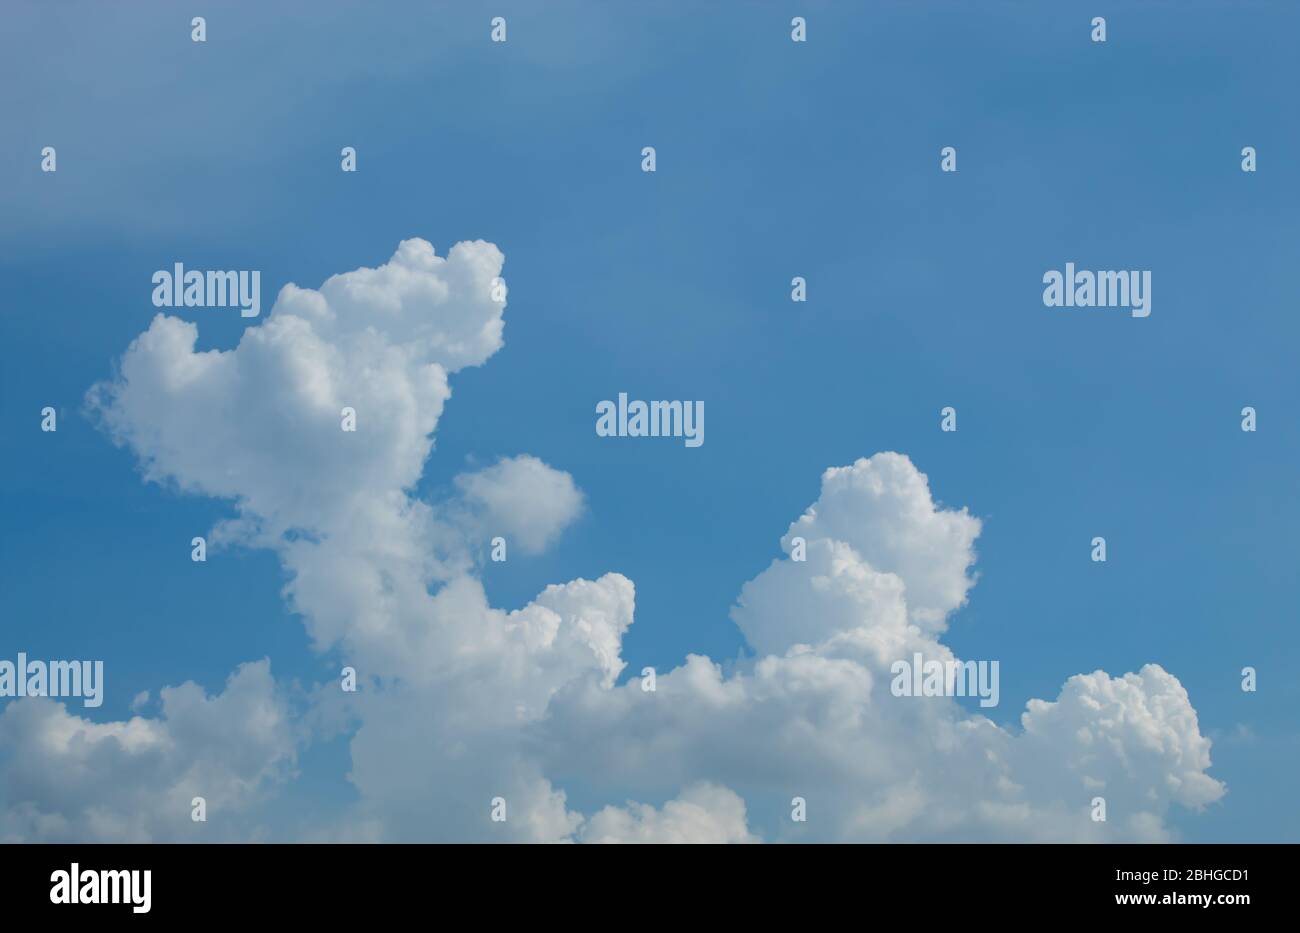 The beauty of the sky. Stock Photo